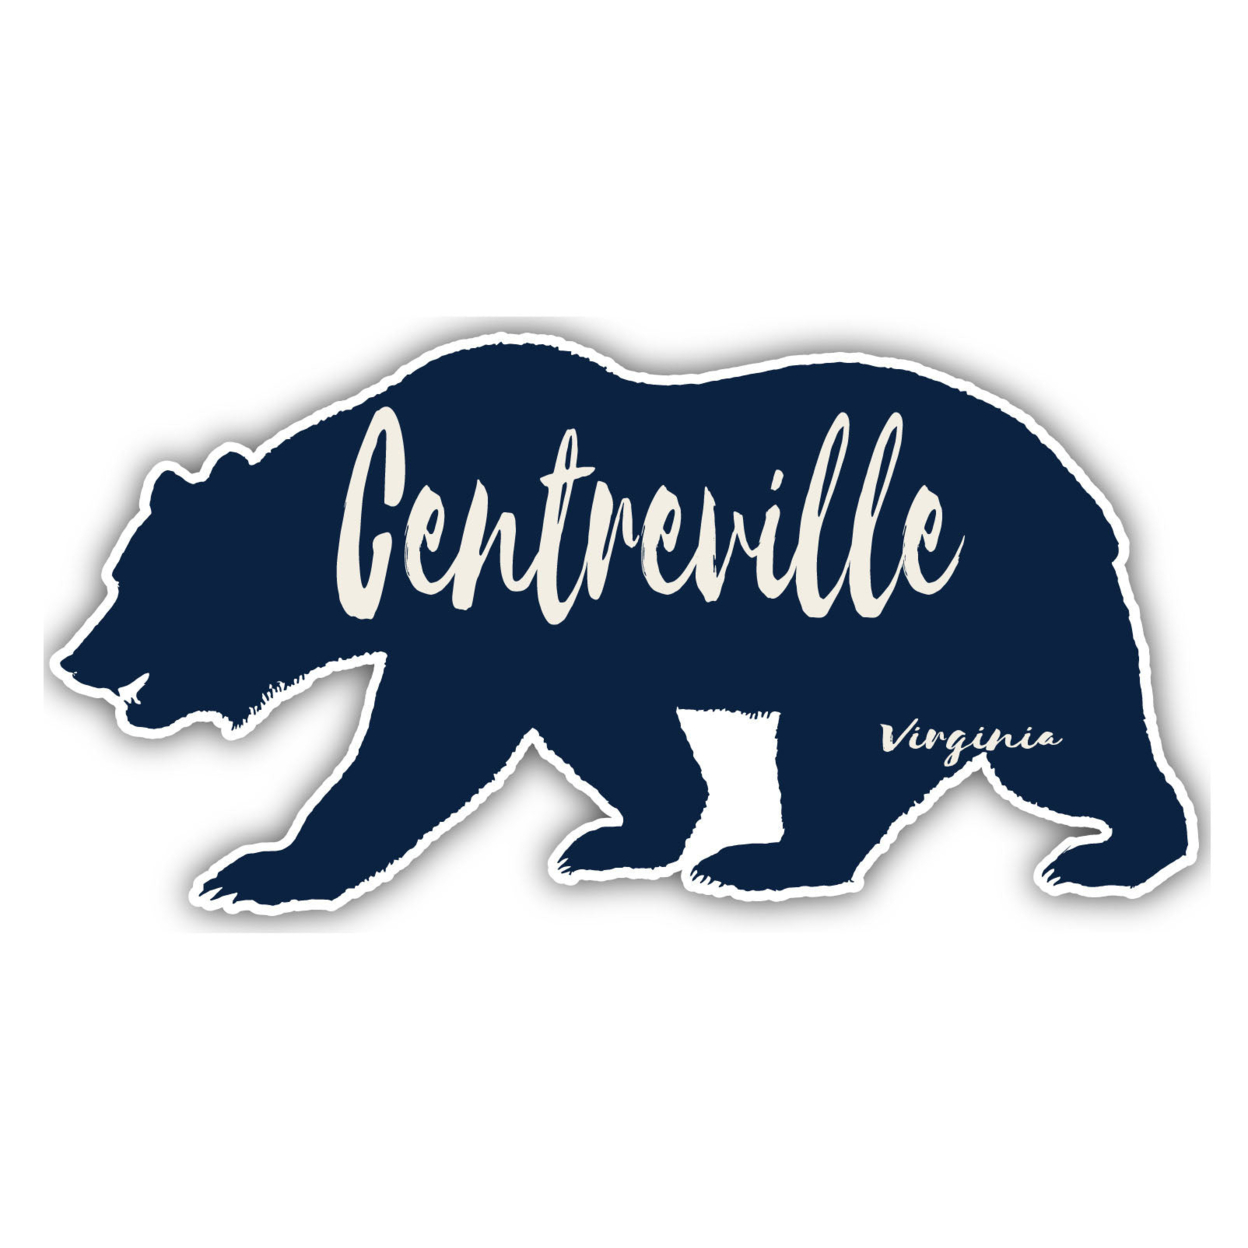 Centreville Virginia Souvenir Decorative Stickers (Choose Theme And Size) - 4-Pack, 8-Inch, Bear